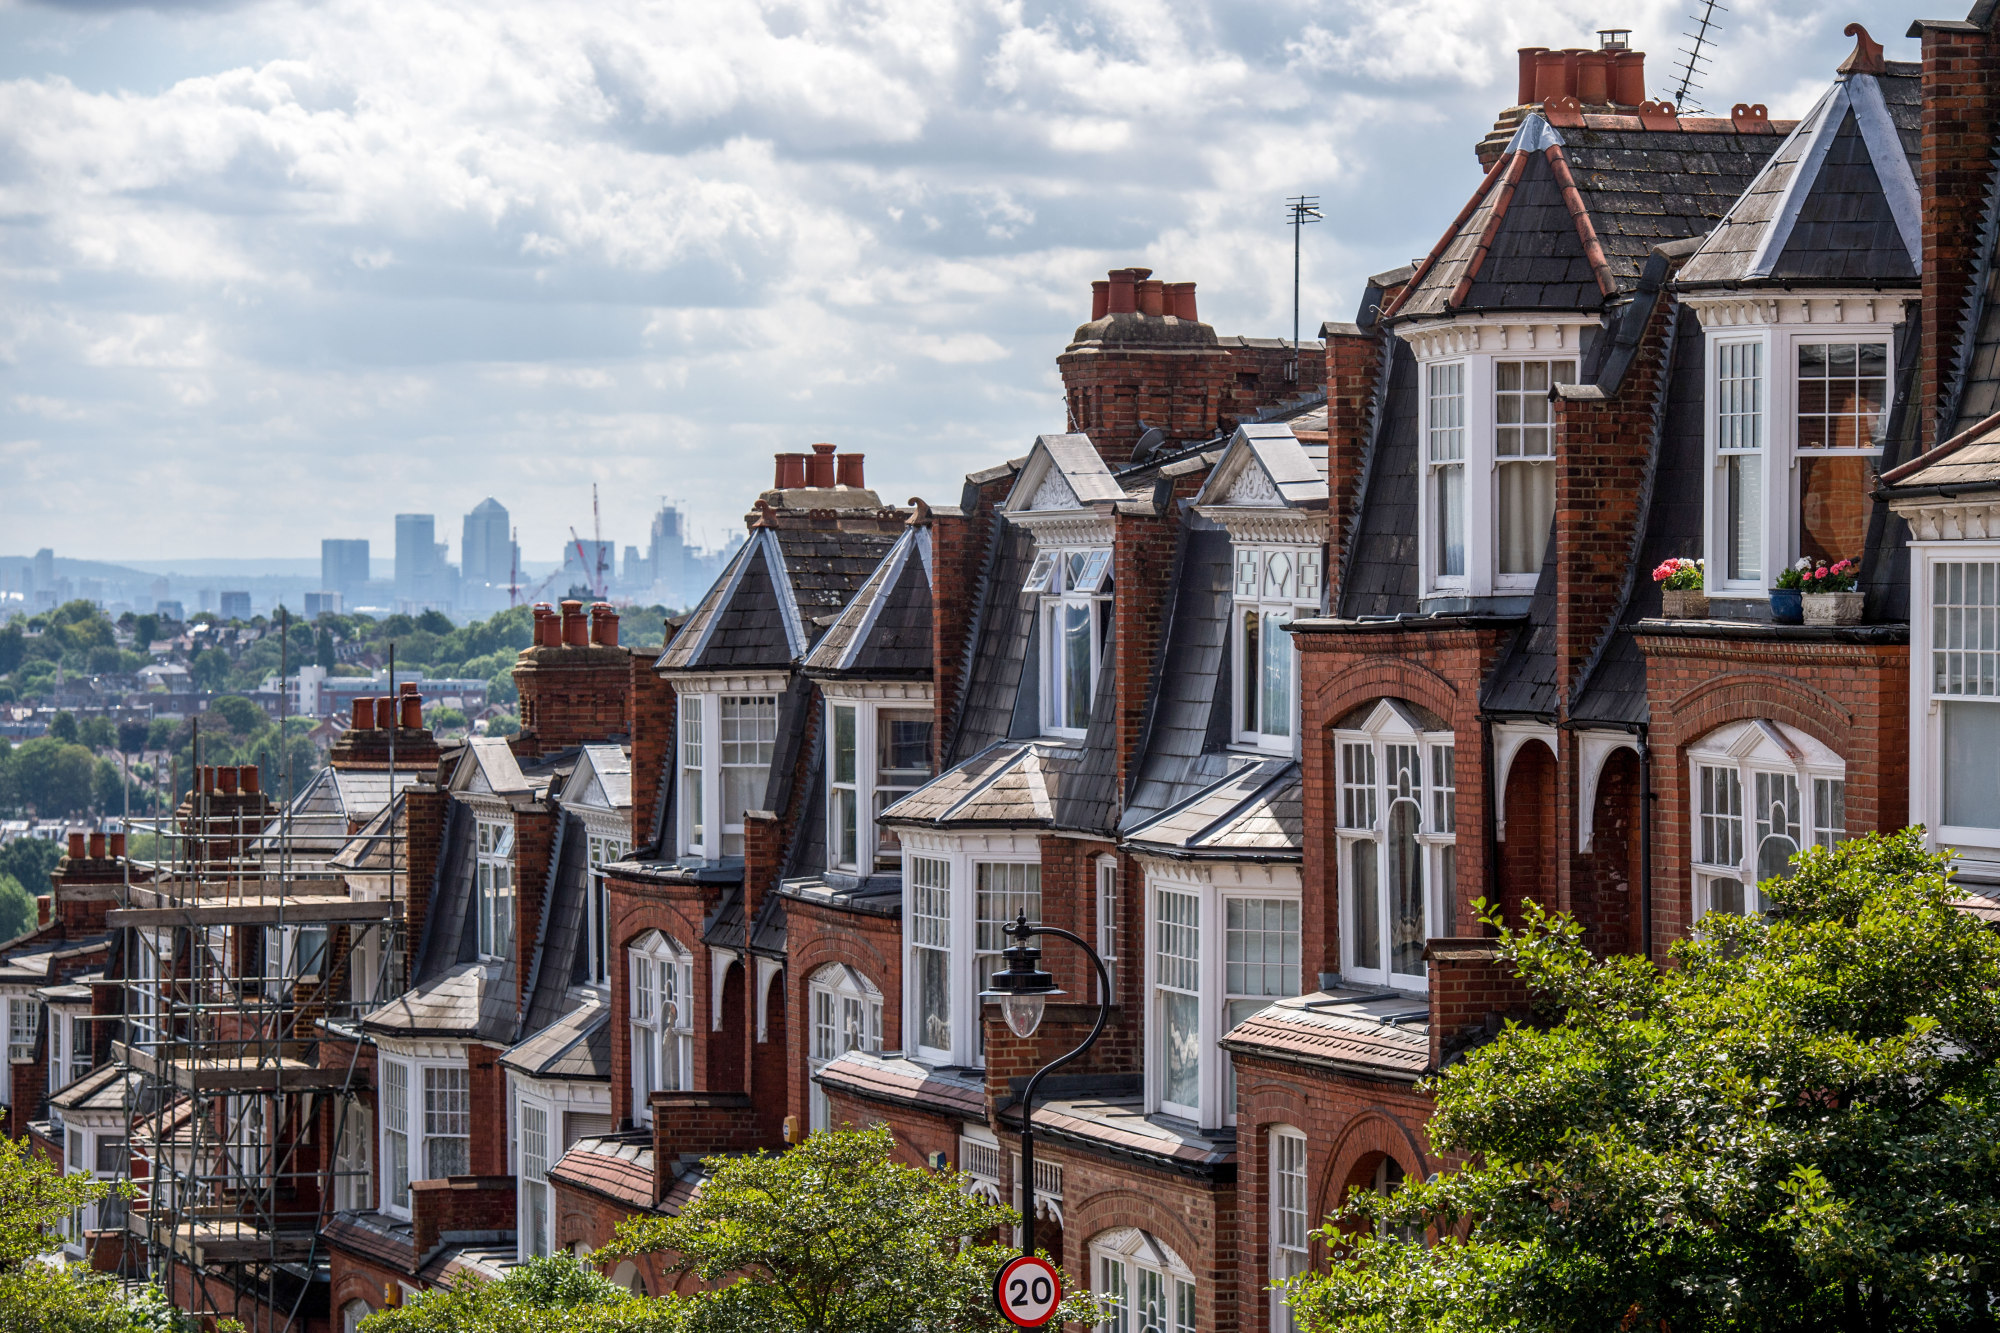 A terraced row of residential housing sit in the Muswell Hill district, in view of the Canary Wharf financial, business and shopping district of London, U.K., on Tuesday, July 31, 2018. U.K. house prices bucked their recent trend with a modest pick up in growth in July, according to Nationwide Building Society.